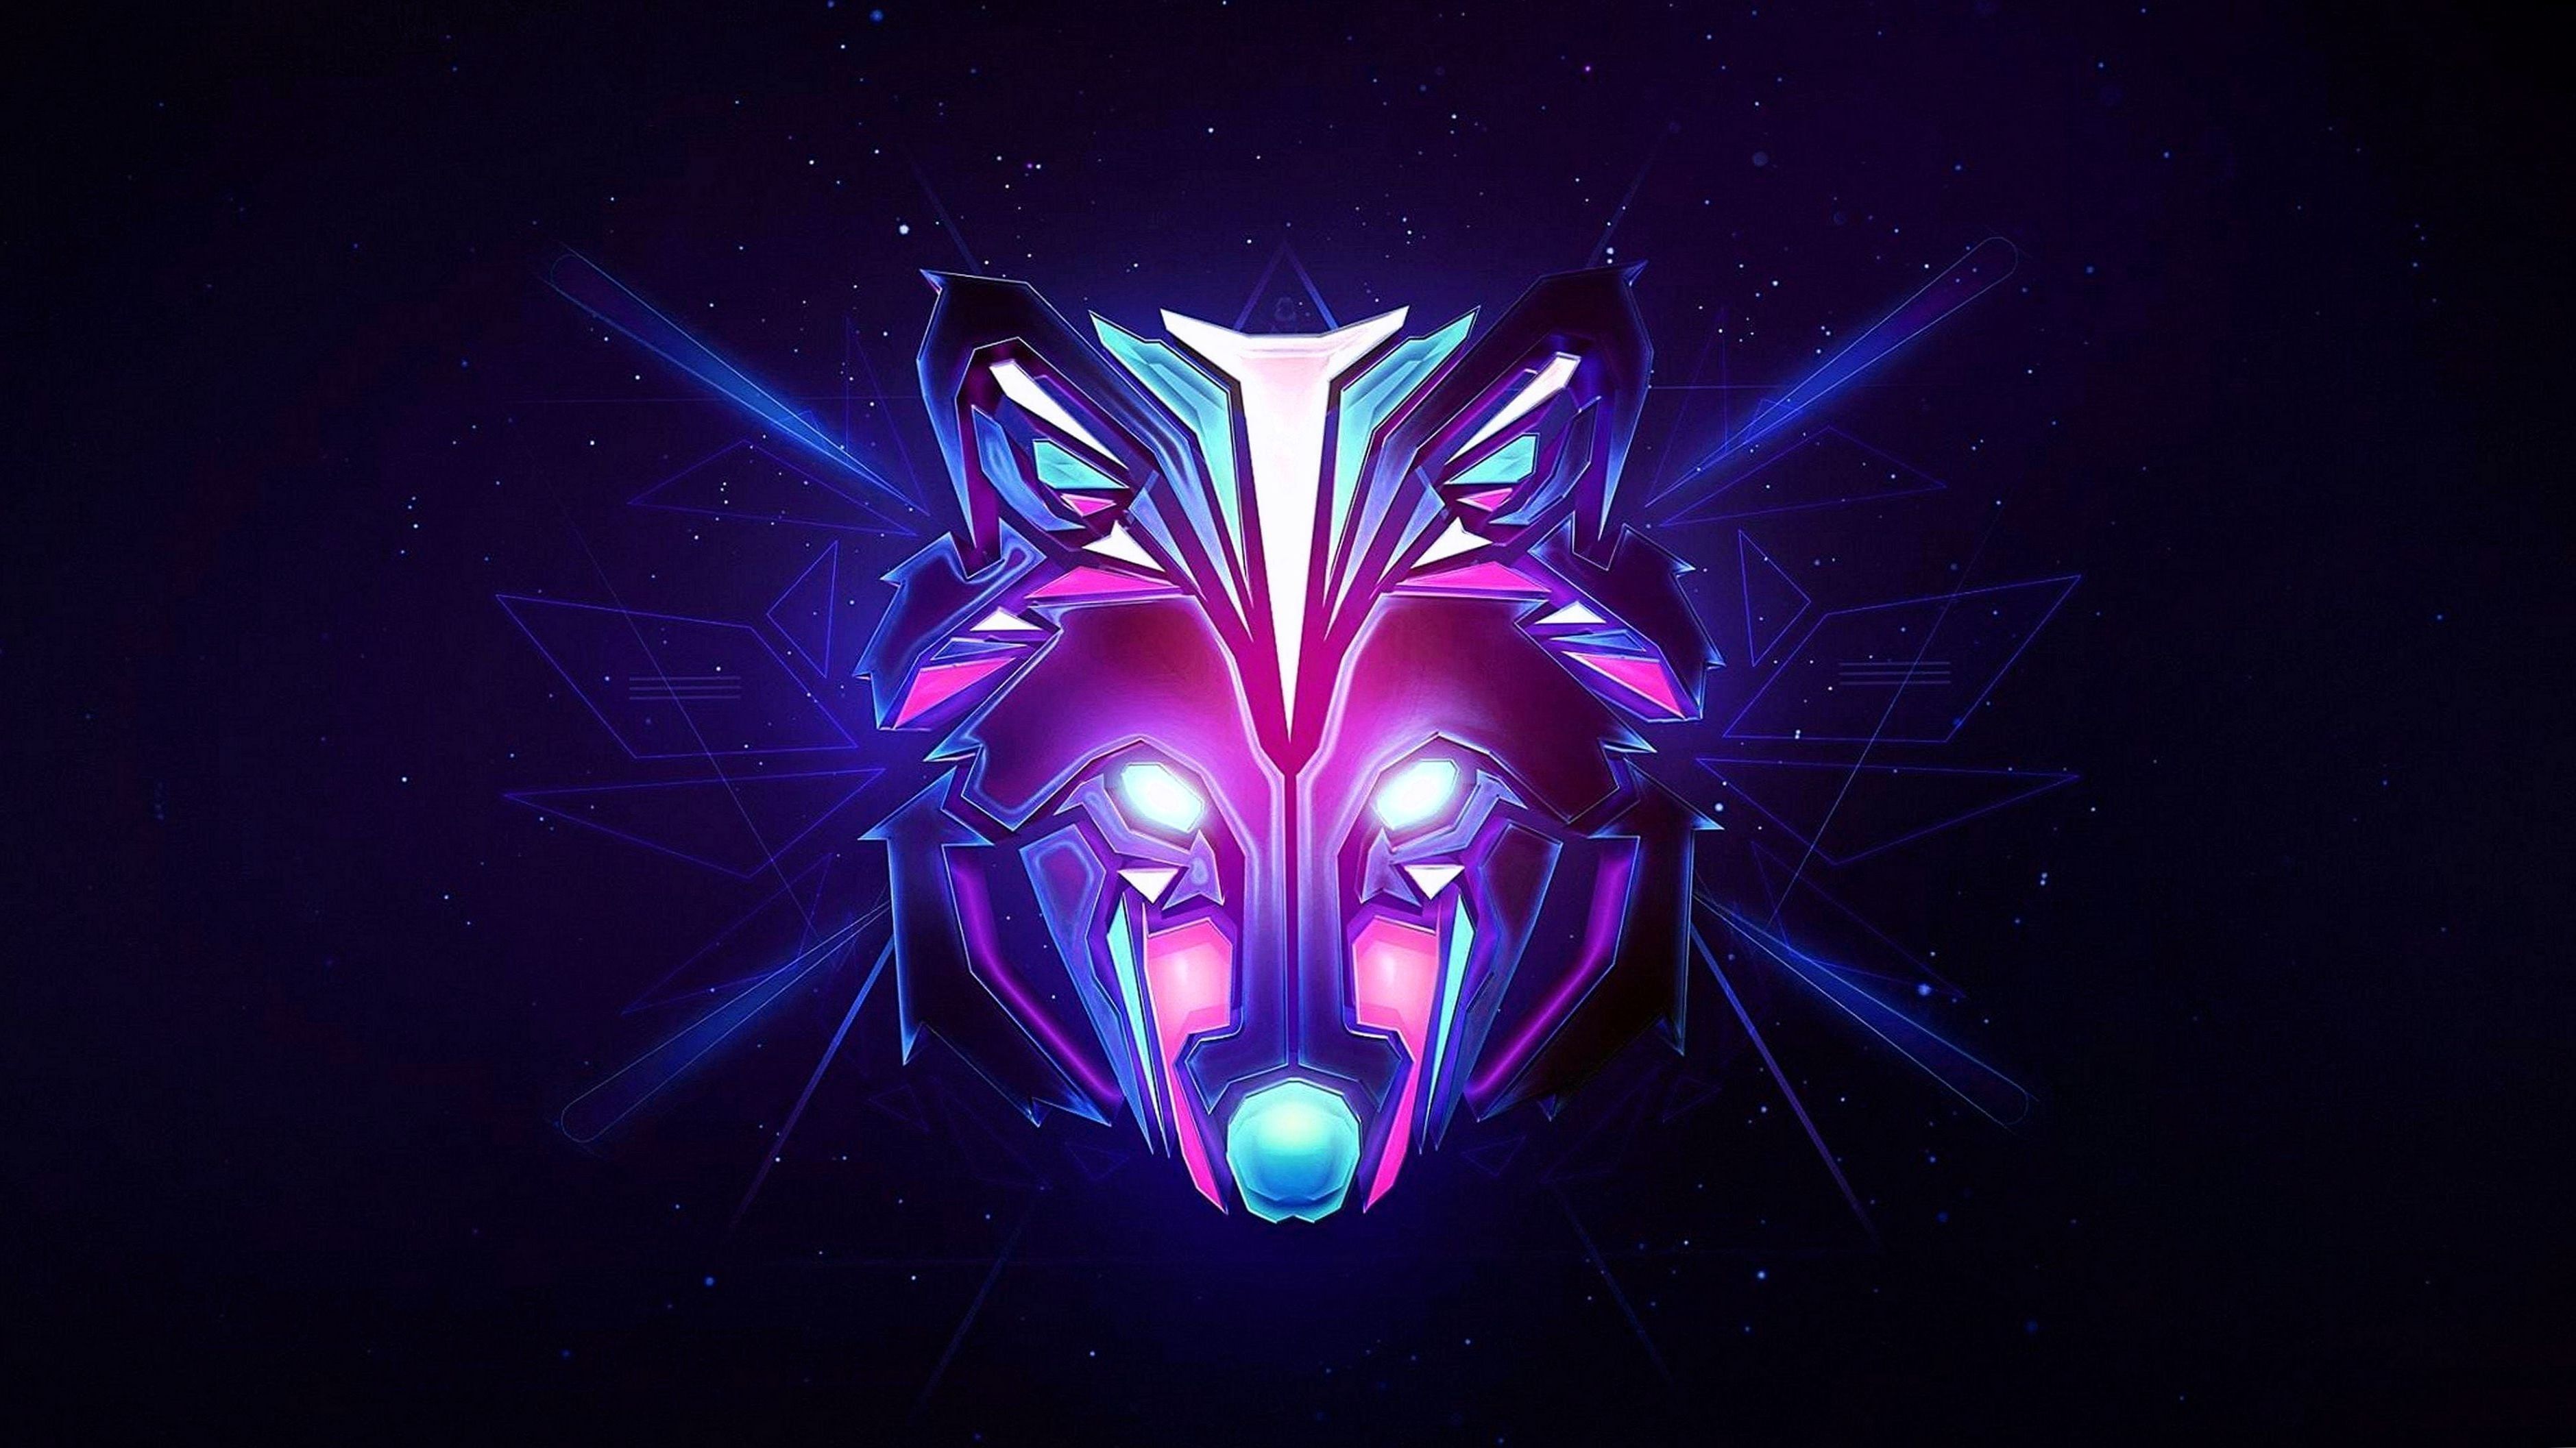 Free download Gamingwolfs in 2020 Wolf wallpaper 2048x1152 ...